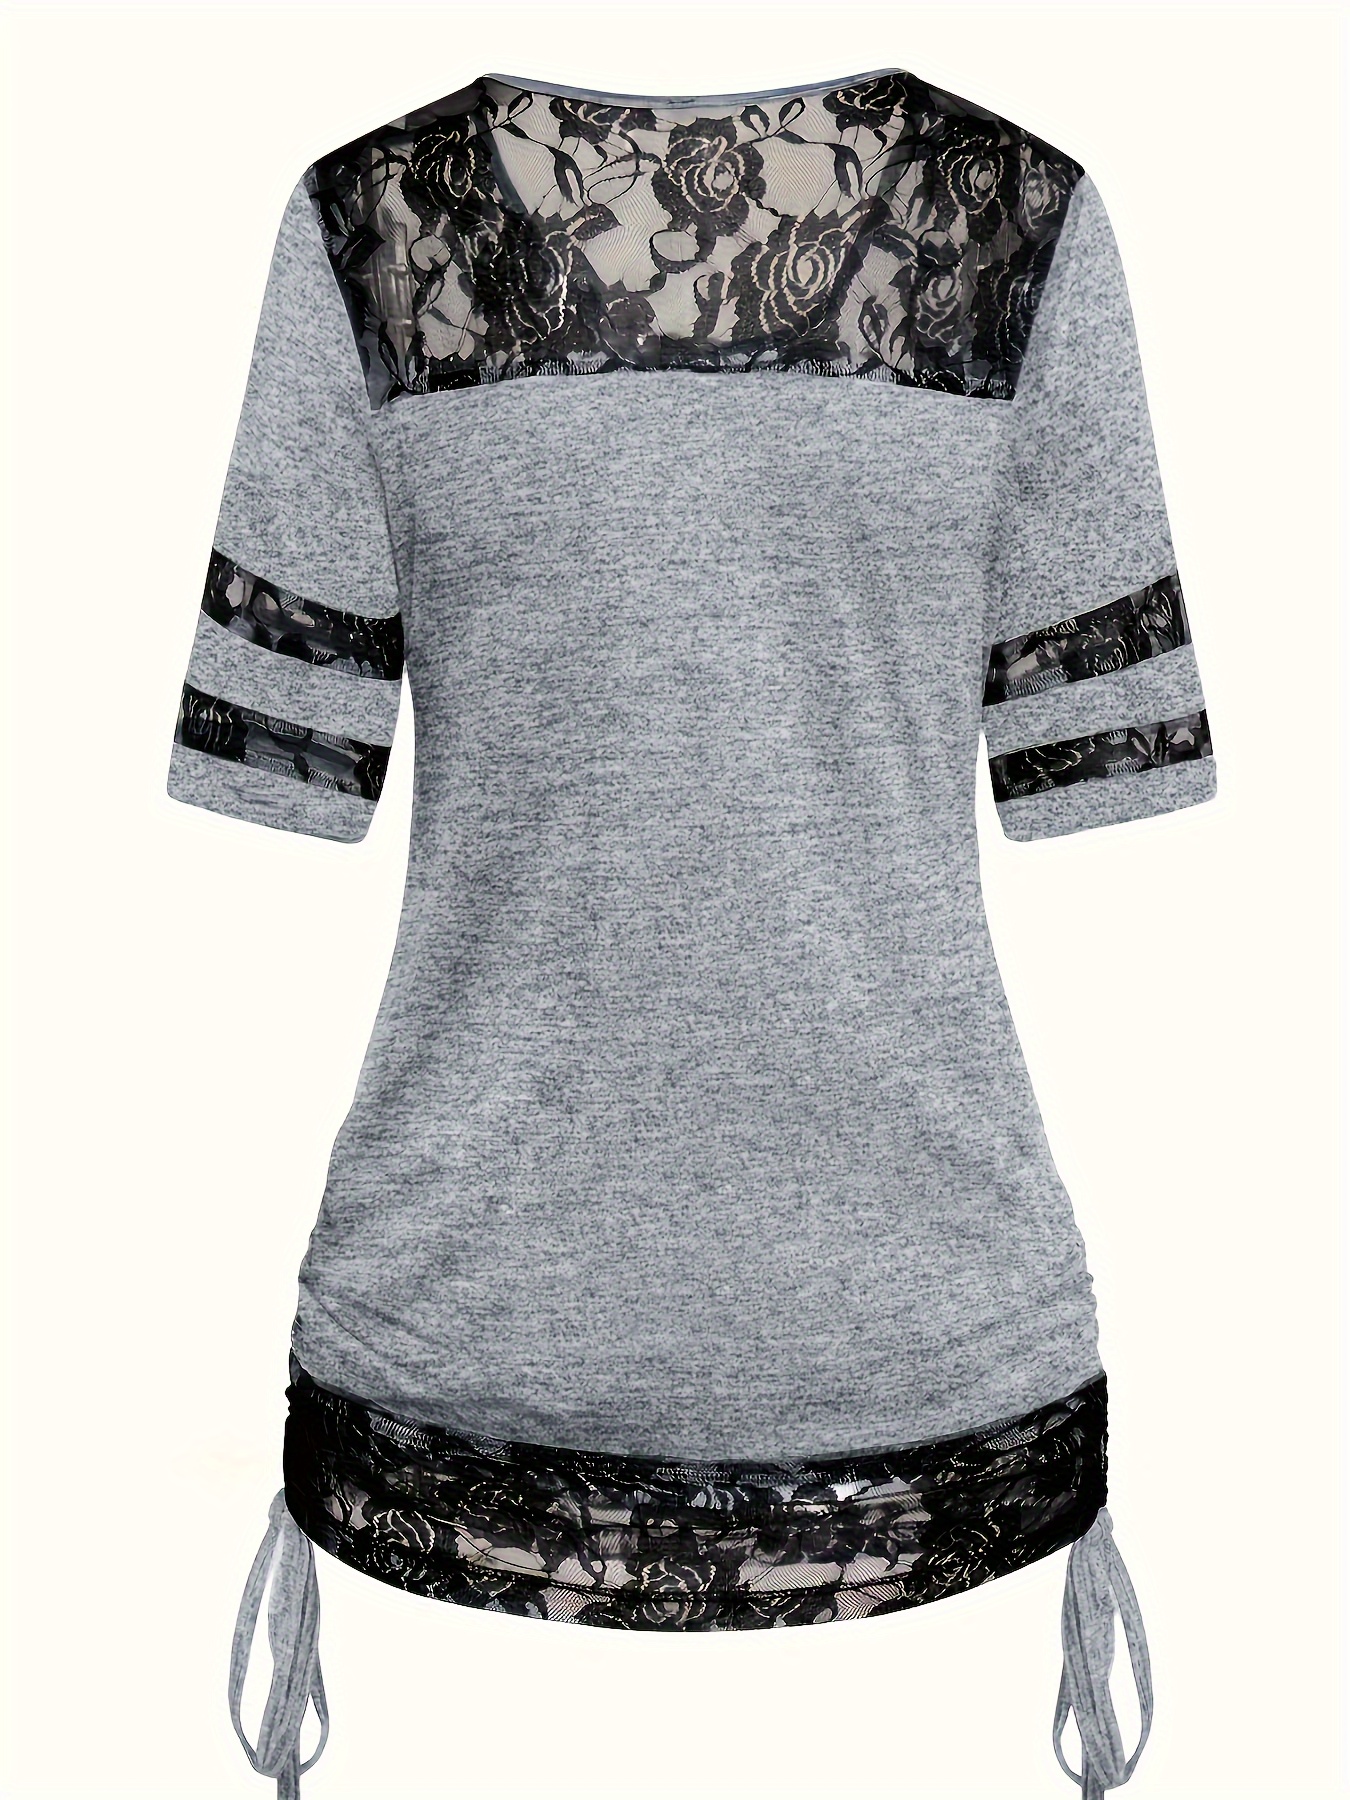 Mesh Top With Side Drawstrings Short Sleeve Top